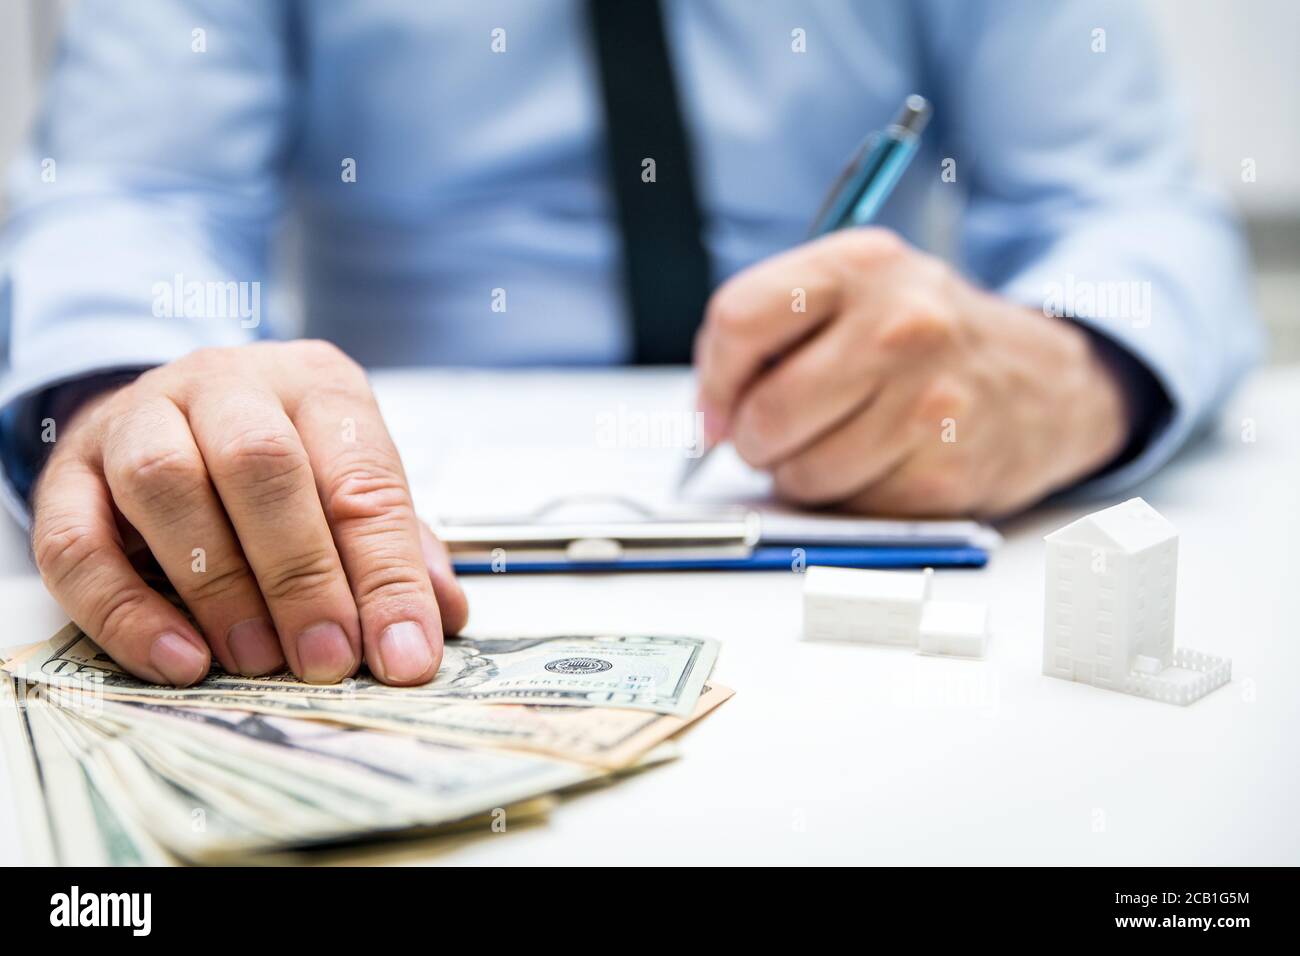 Businessman with us dollars and symbolic houses and building projects, bodypart hands Stock Photo